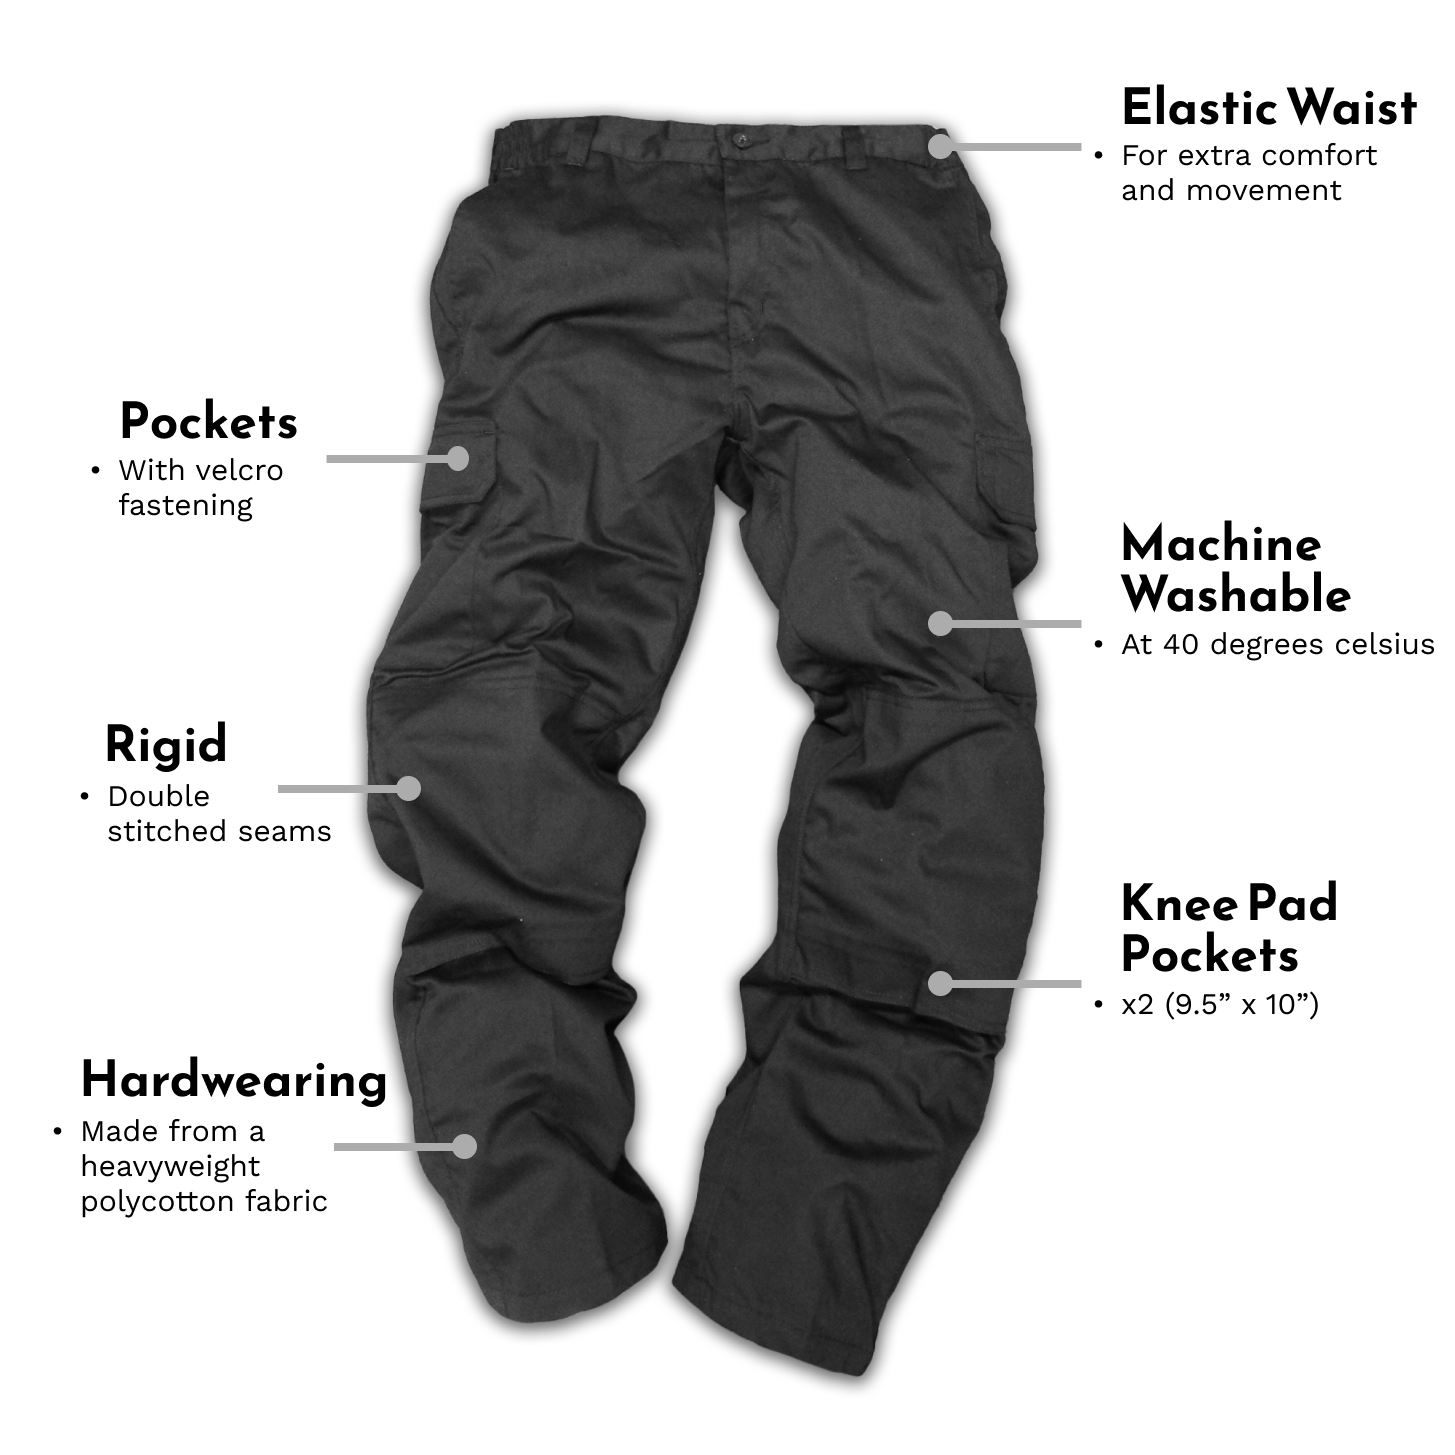 Men's Site King Combat Cargo Work Trousers - Site King